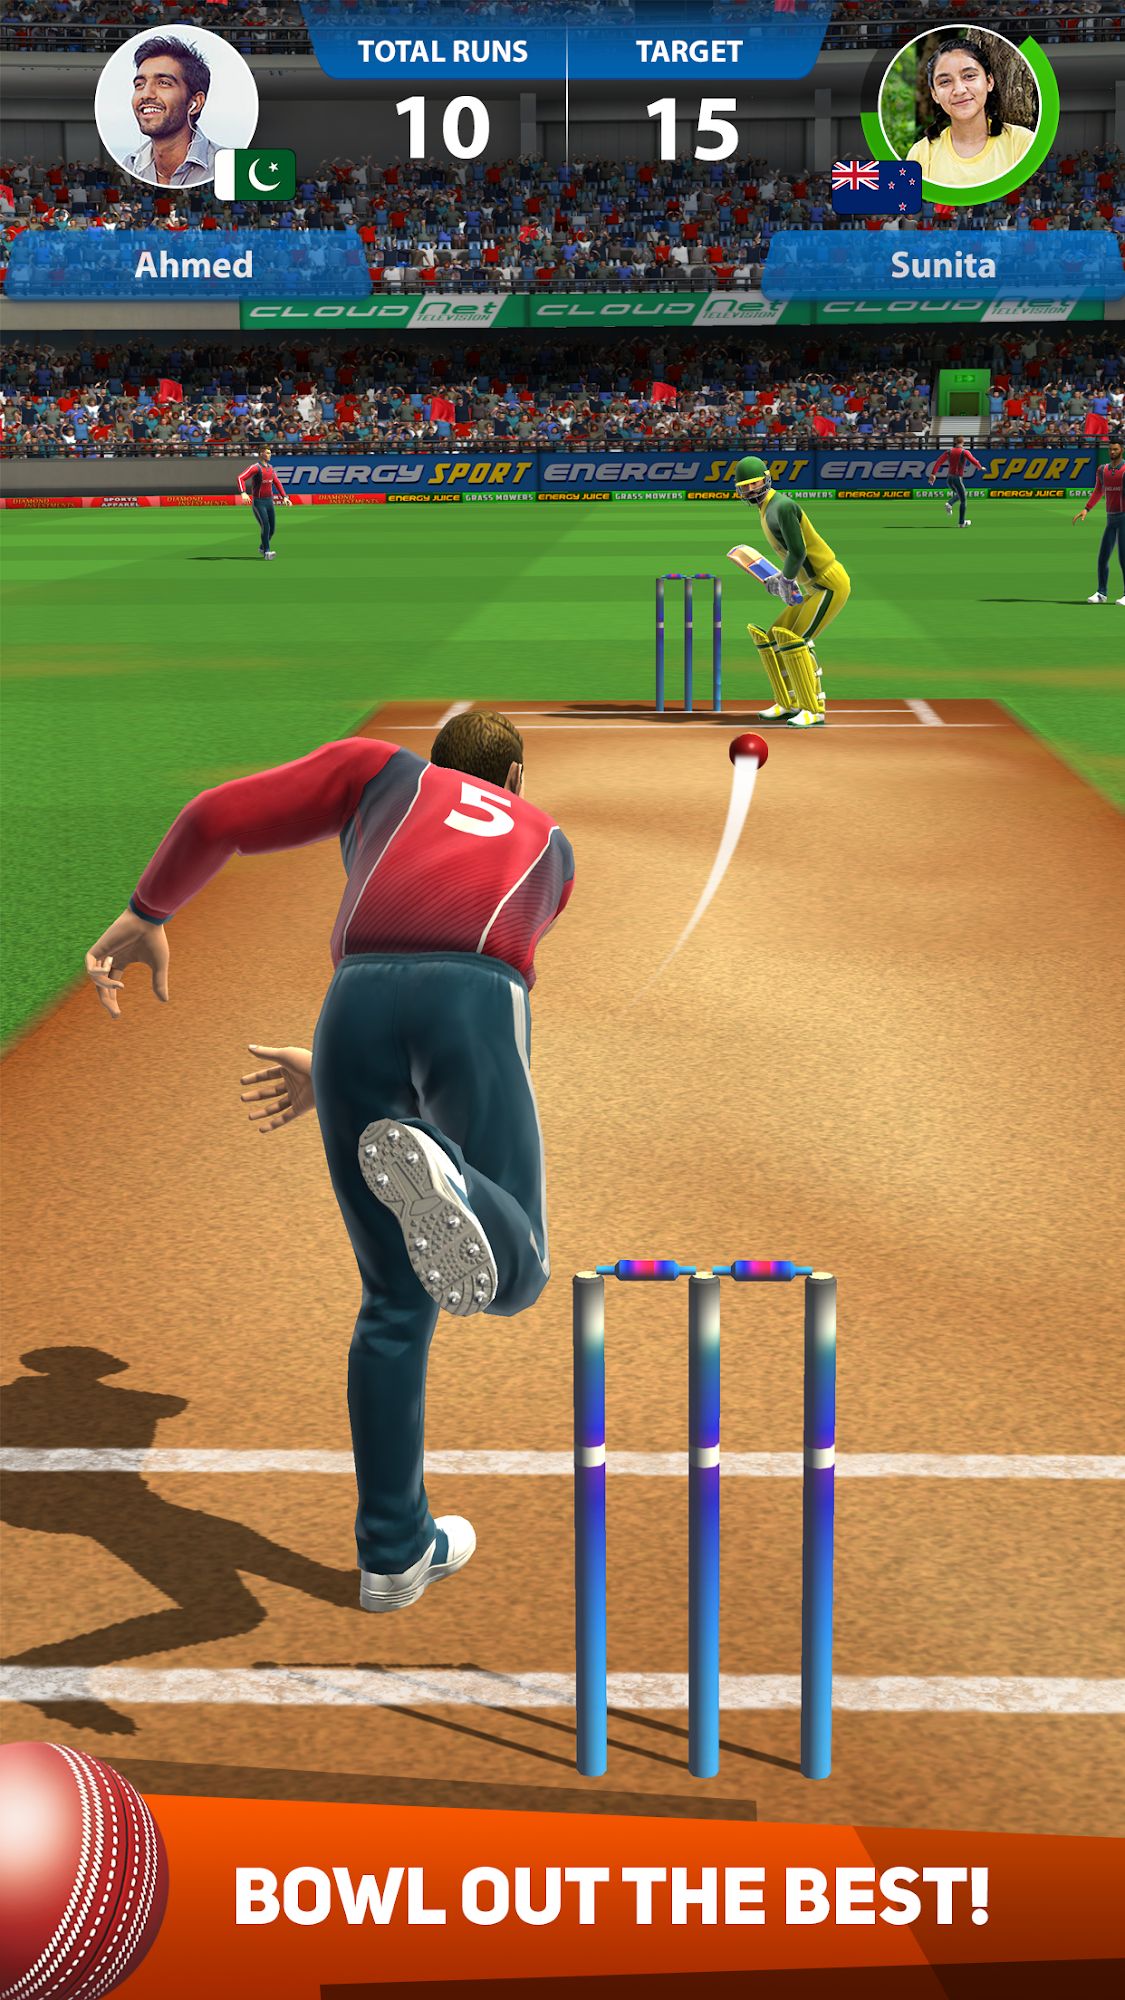 Cricket League for Android